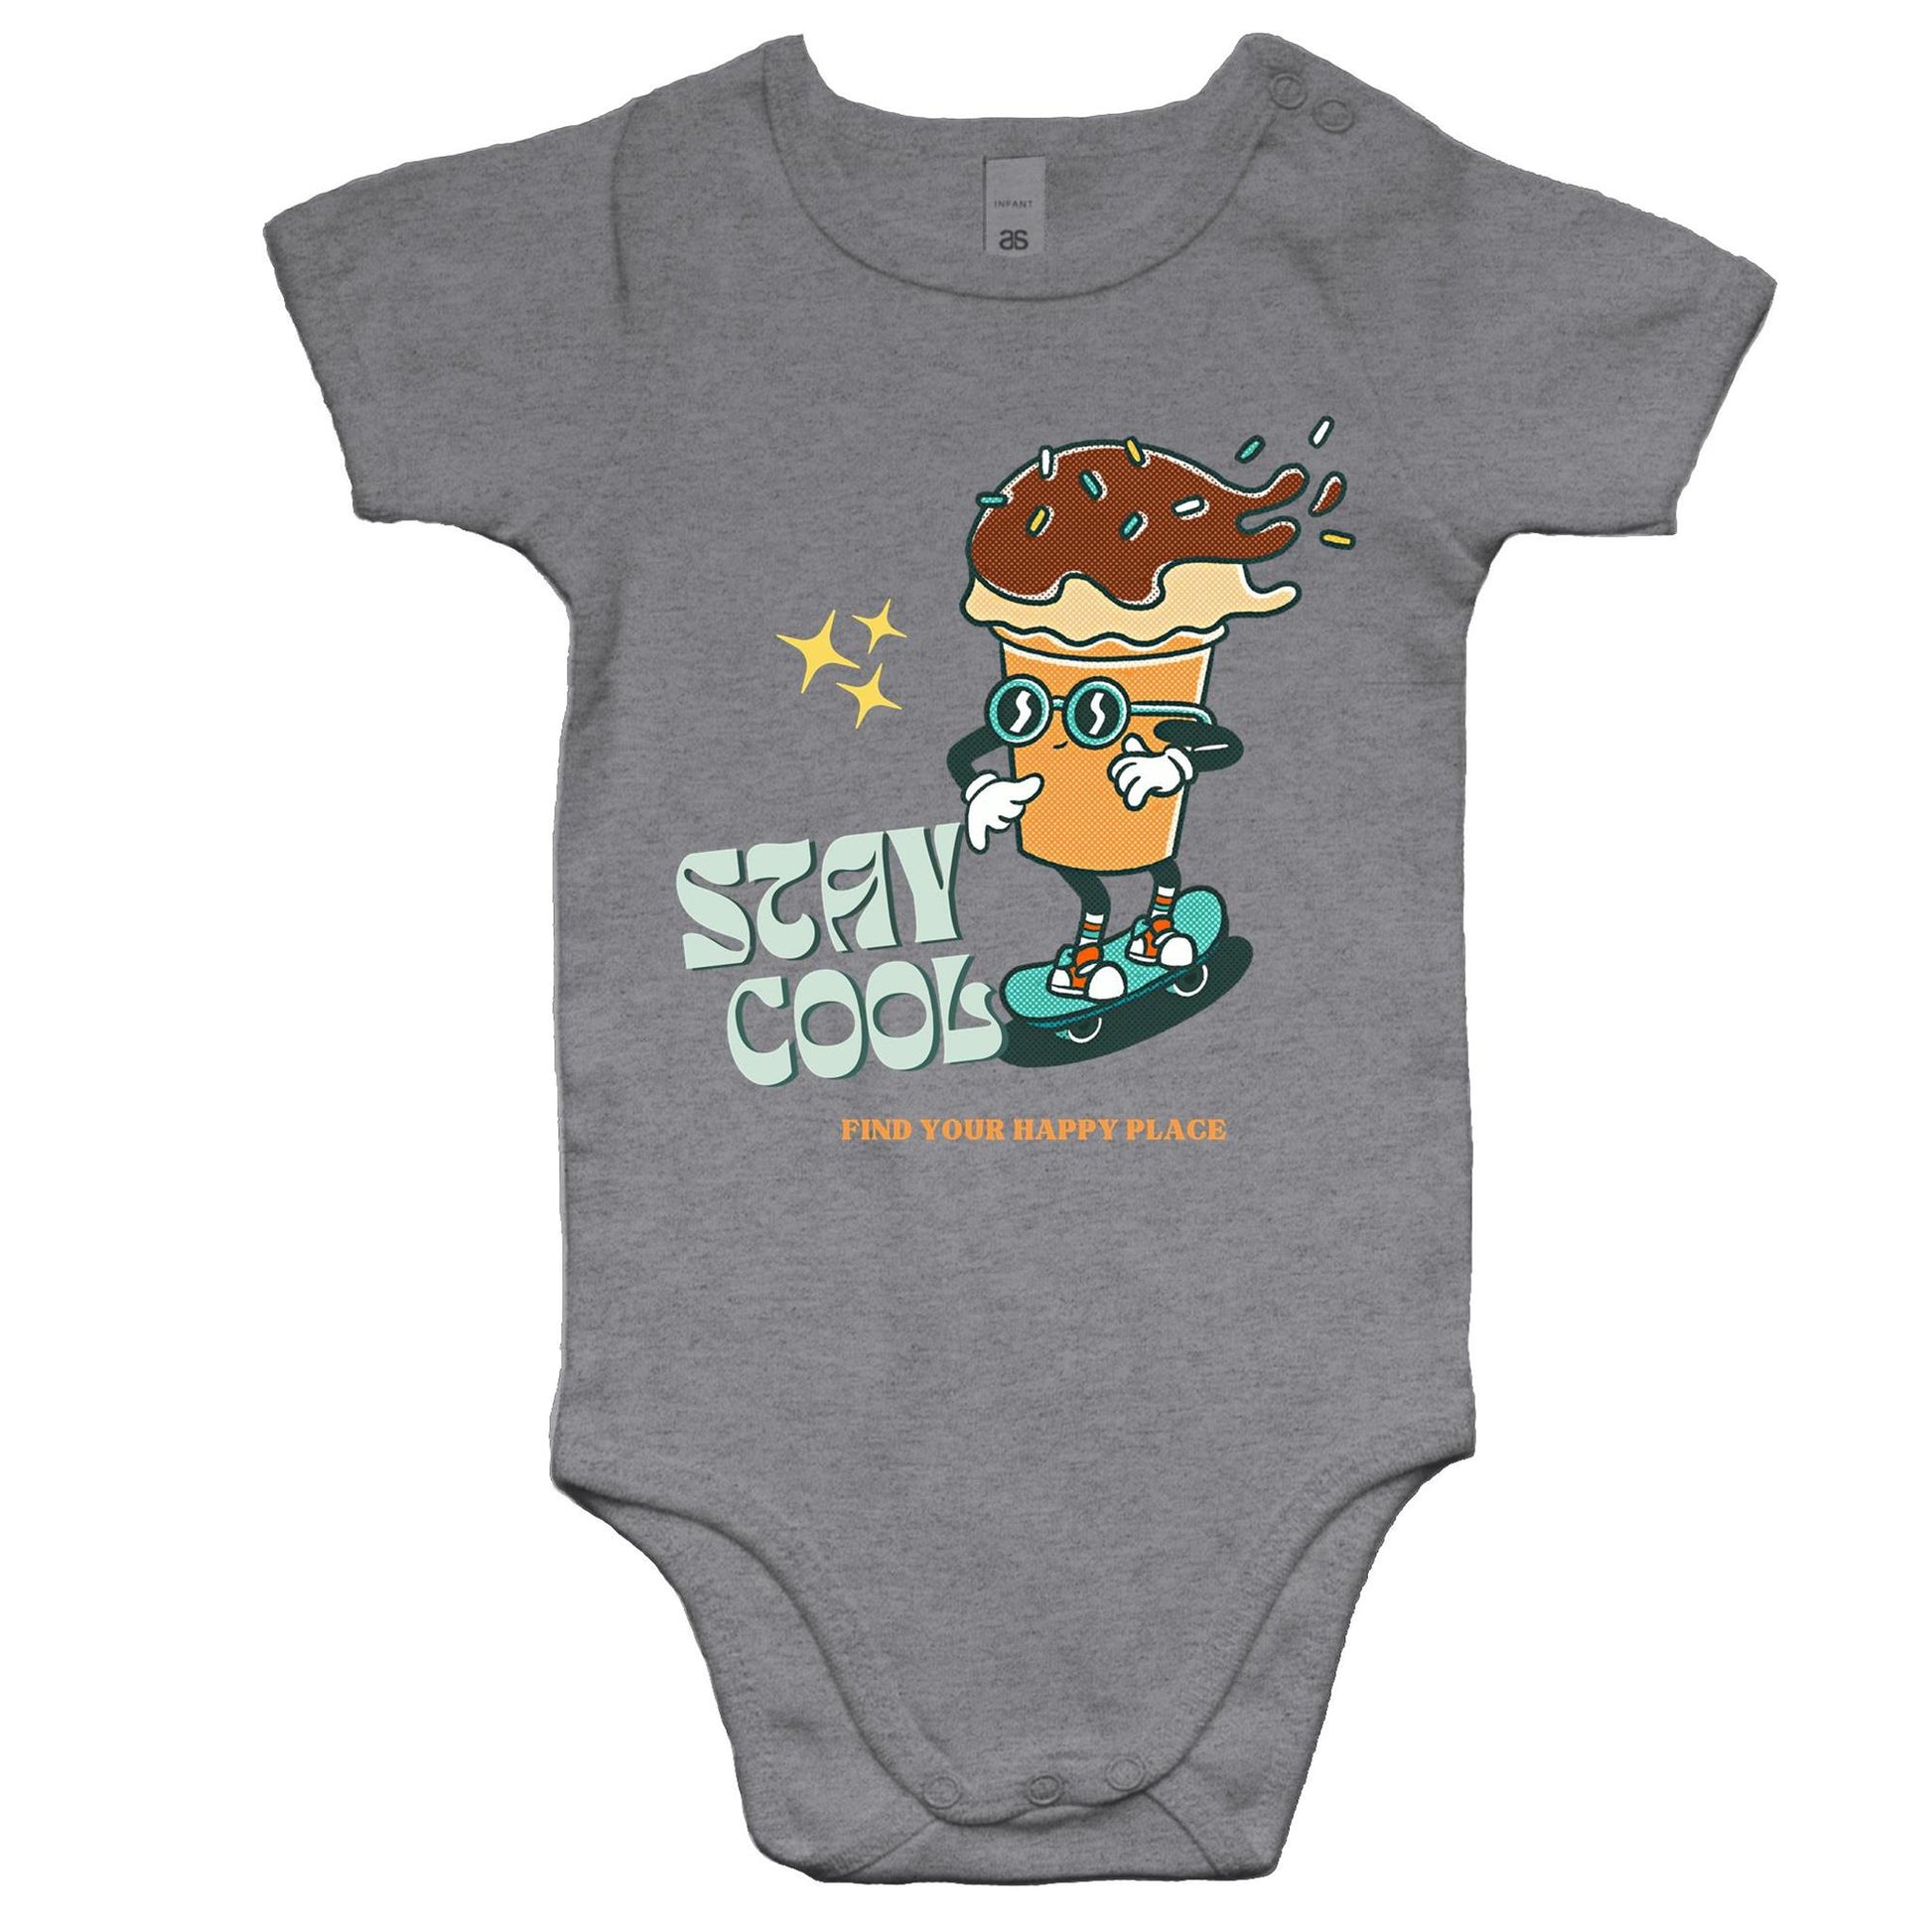 Stay Cool, Find Your Happy Place - Baby Bodysuit Grey Marle Baby Bodysuit Retro Summer